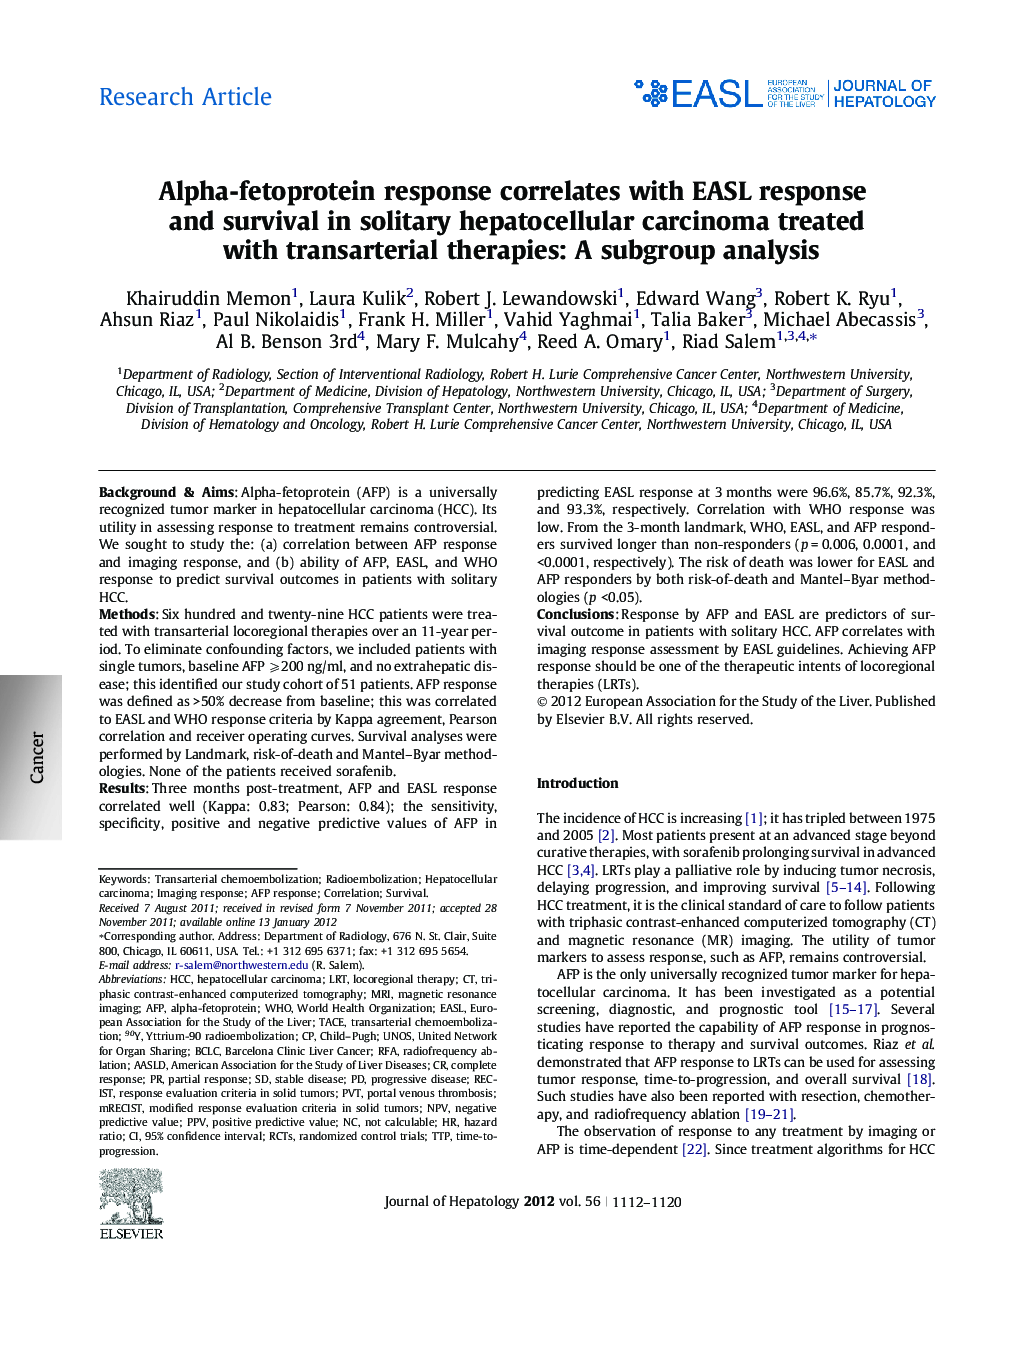 Research ArticleAlpha-fetoprotein response correlates with EASL response and survival in solitary hepatocellular carcinoma treated with transarterial therapies: A subgroup analysis